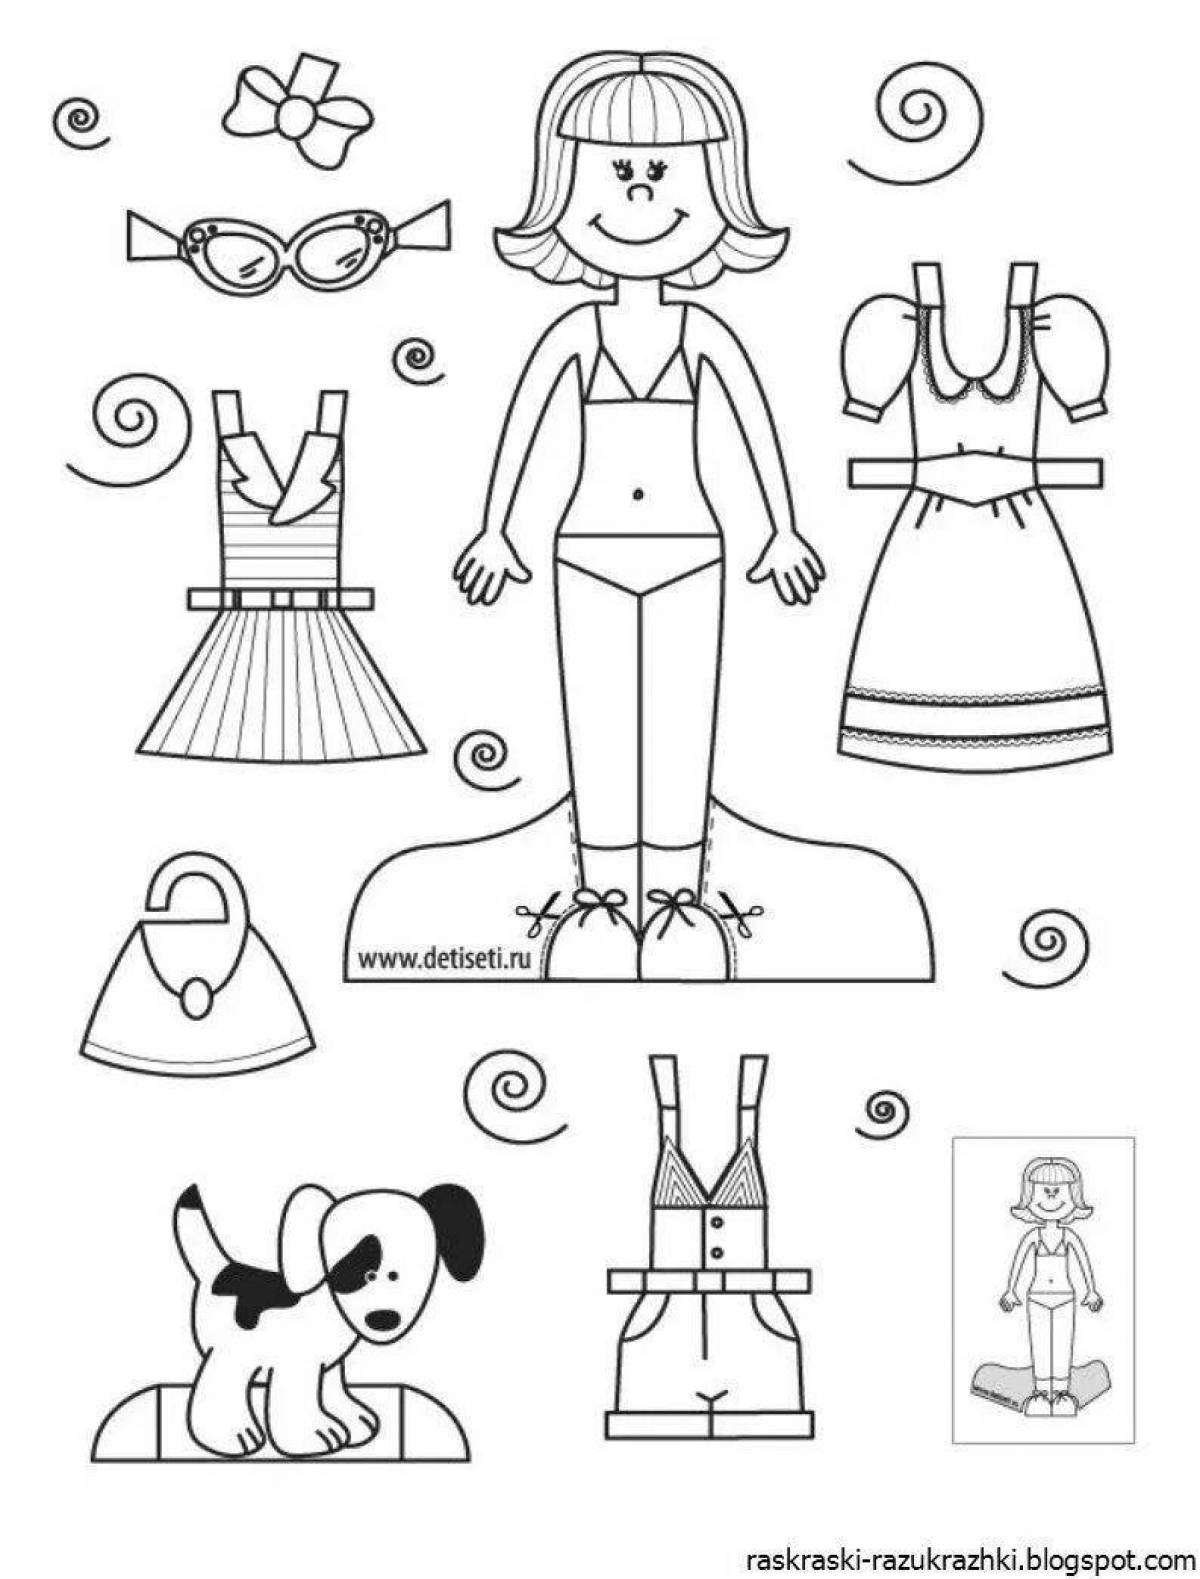 Paper cut doll with clothes #2